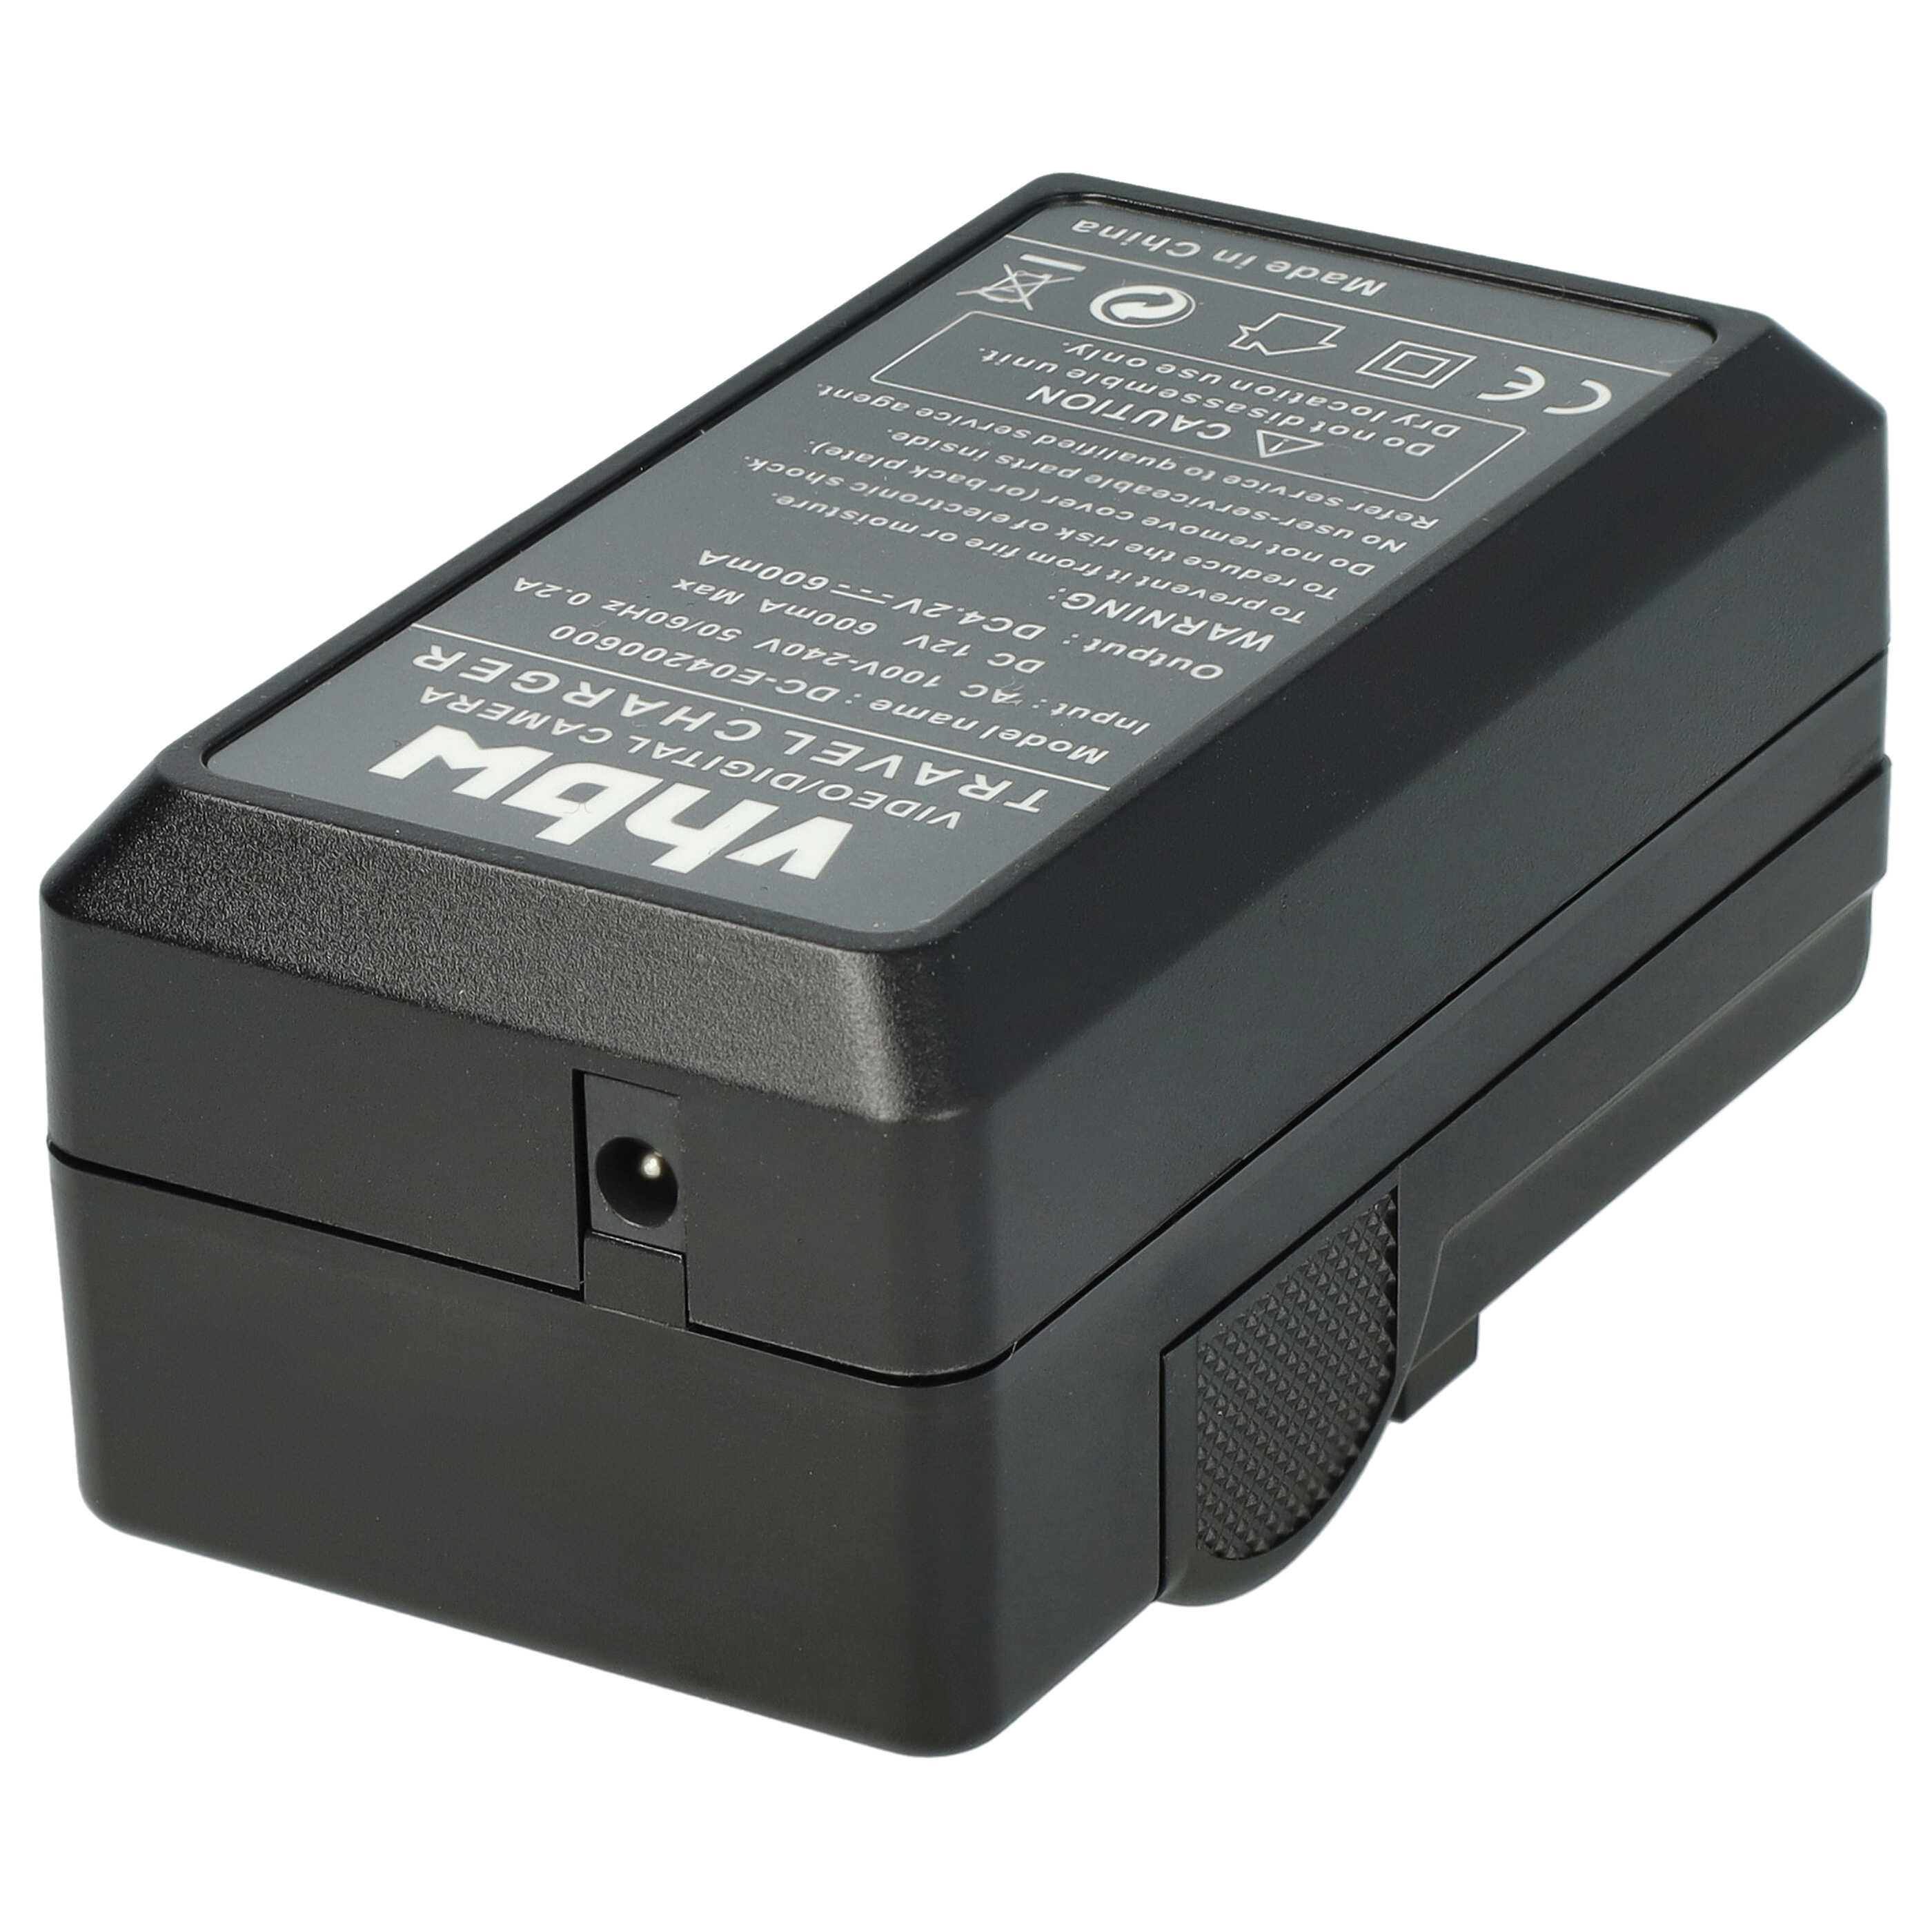 Battery Charger suitable for Sanyo DB-L10 Camera etc. - 0.6 A, 4.2 V